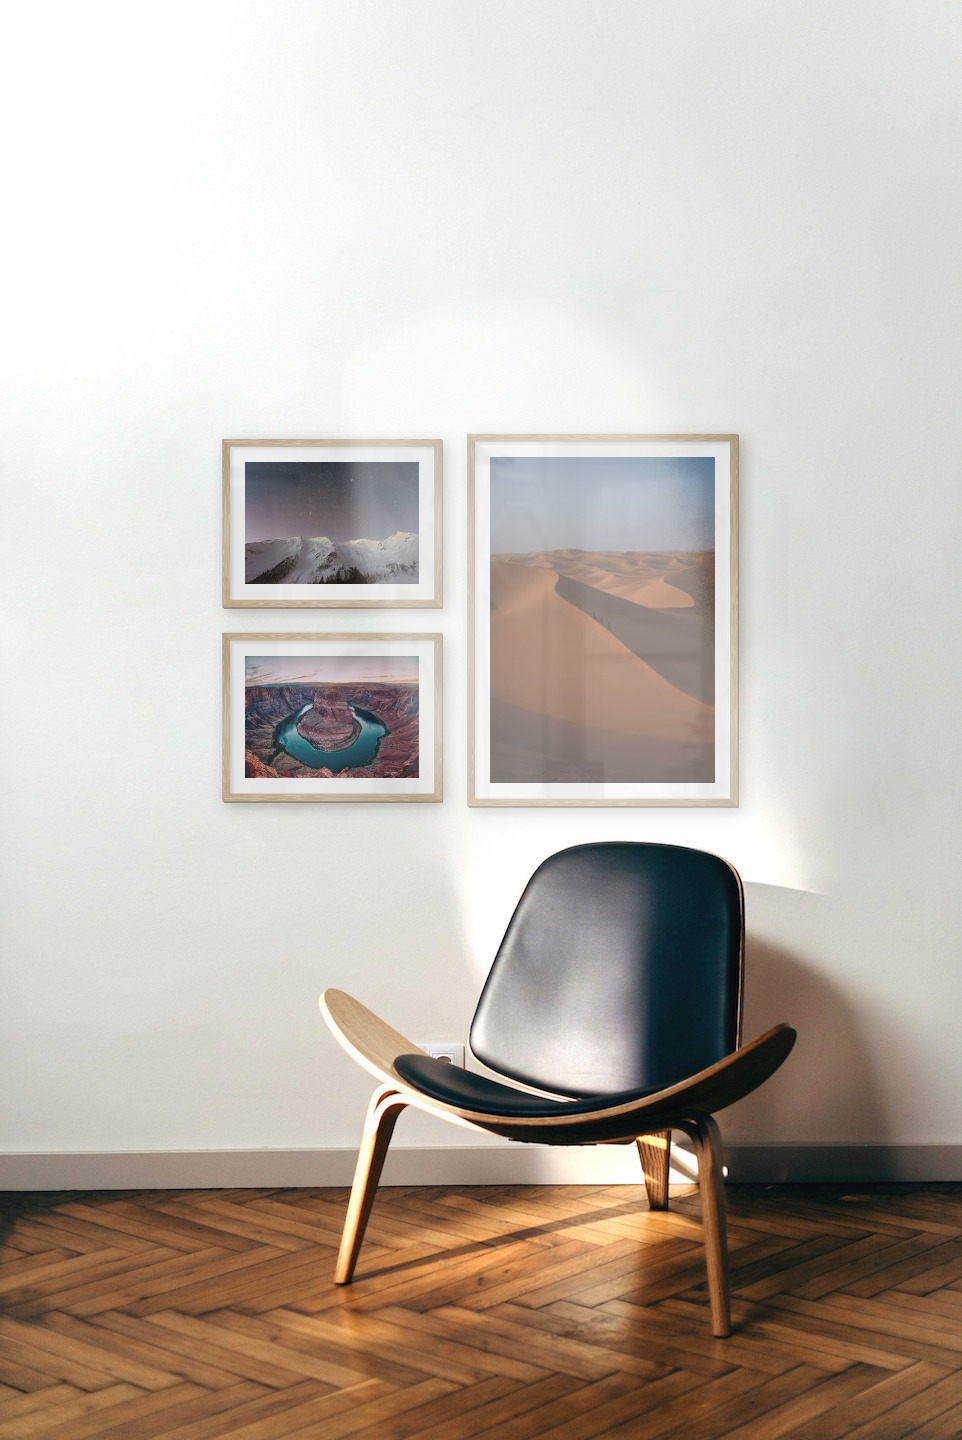 Gallery wall with picture frames in wood in sizes 30x40 and 50x70 with prints "Mountains with night sky", "Canyon" and "Desert"